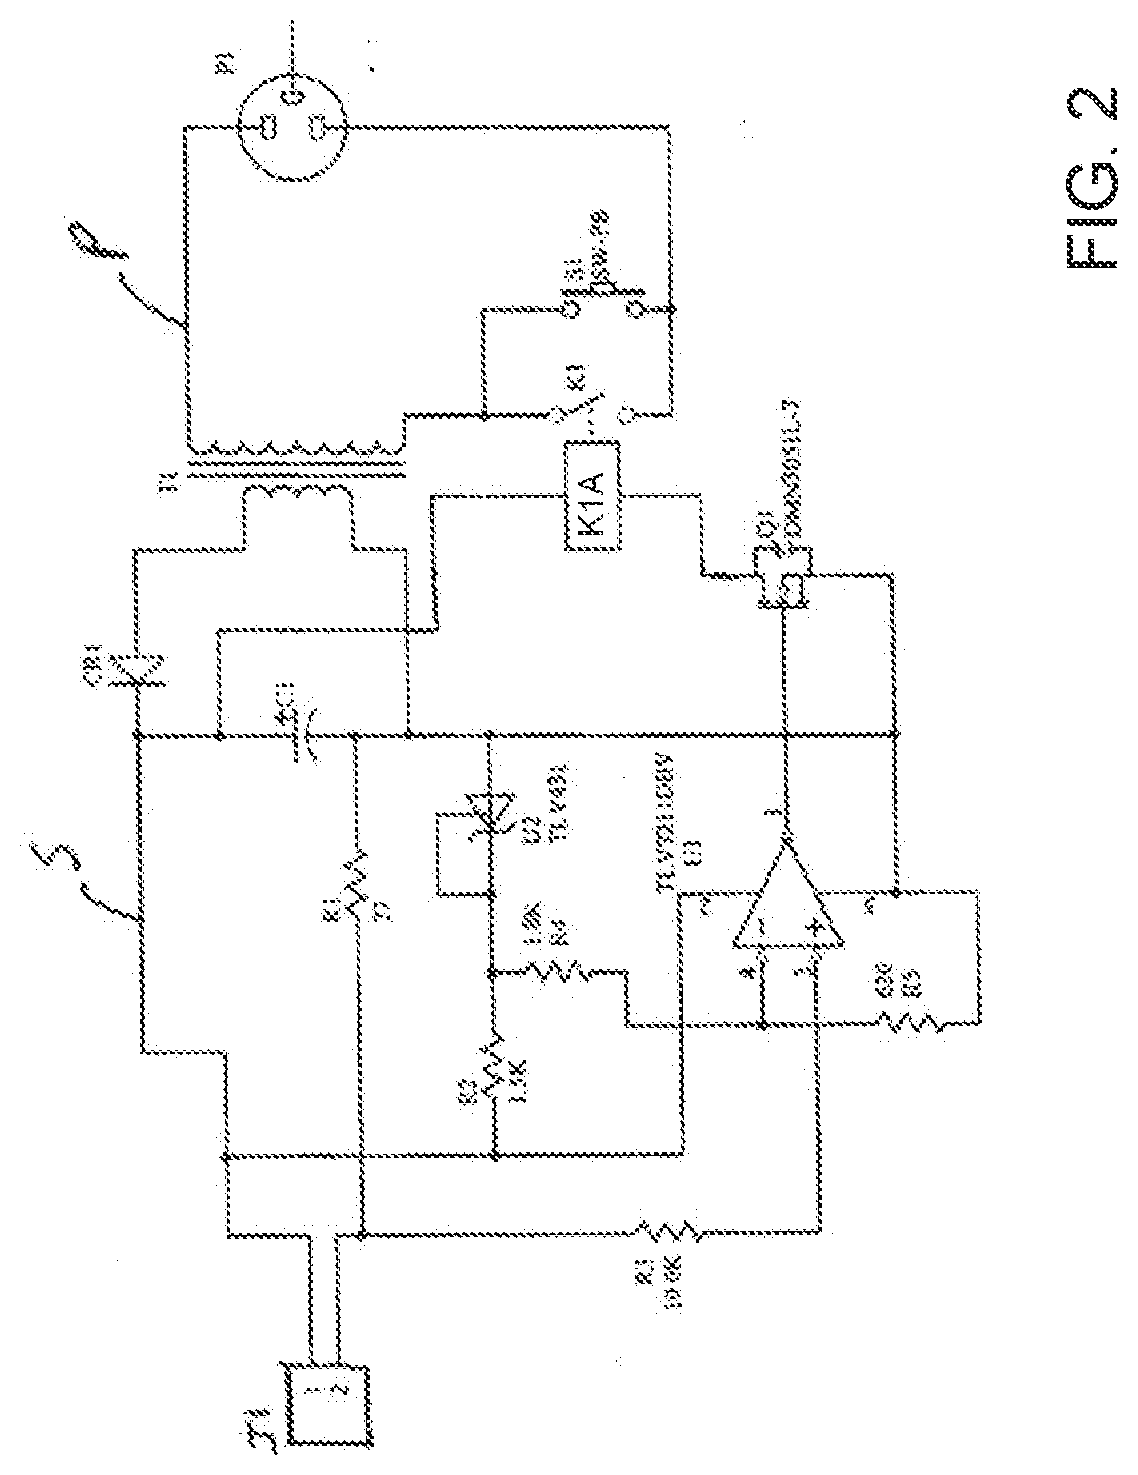 Current sensing circuit disconnect device and method